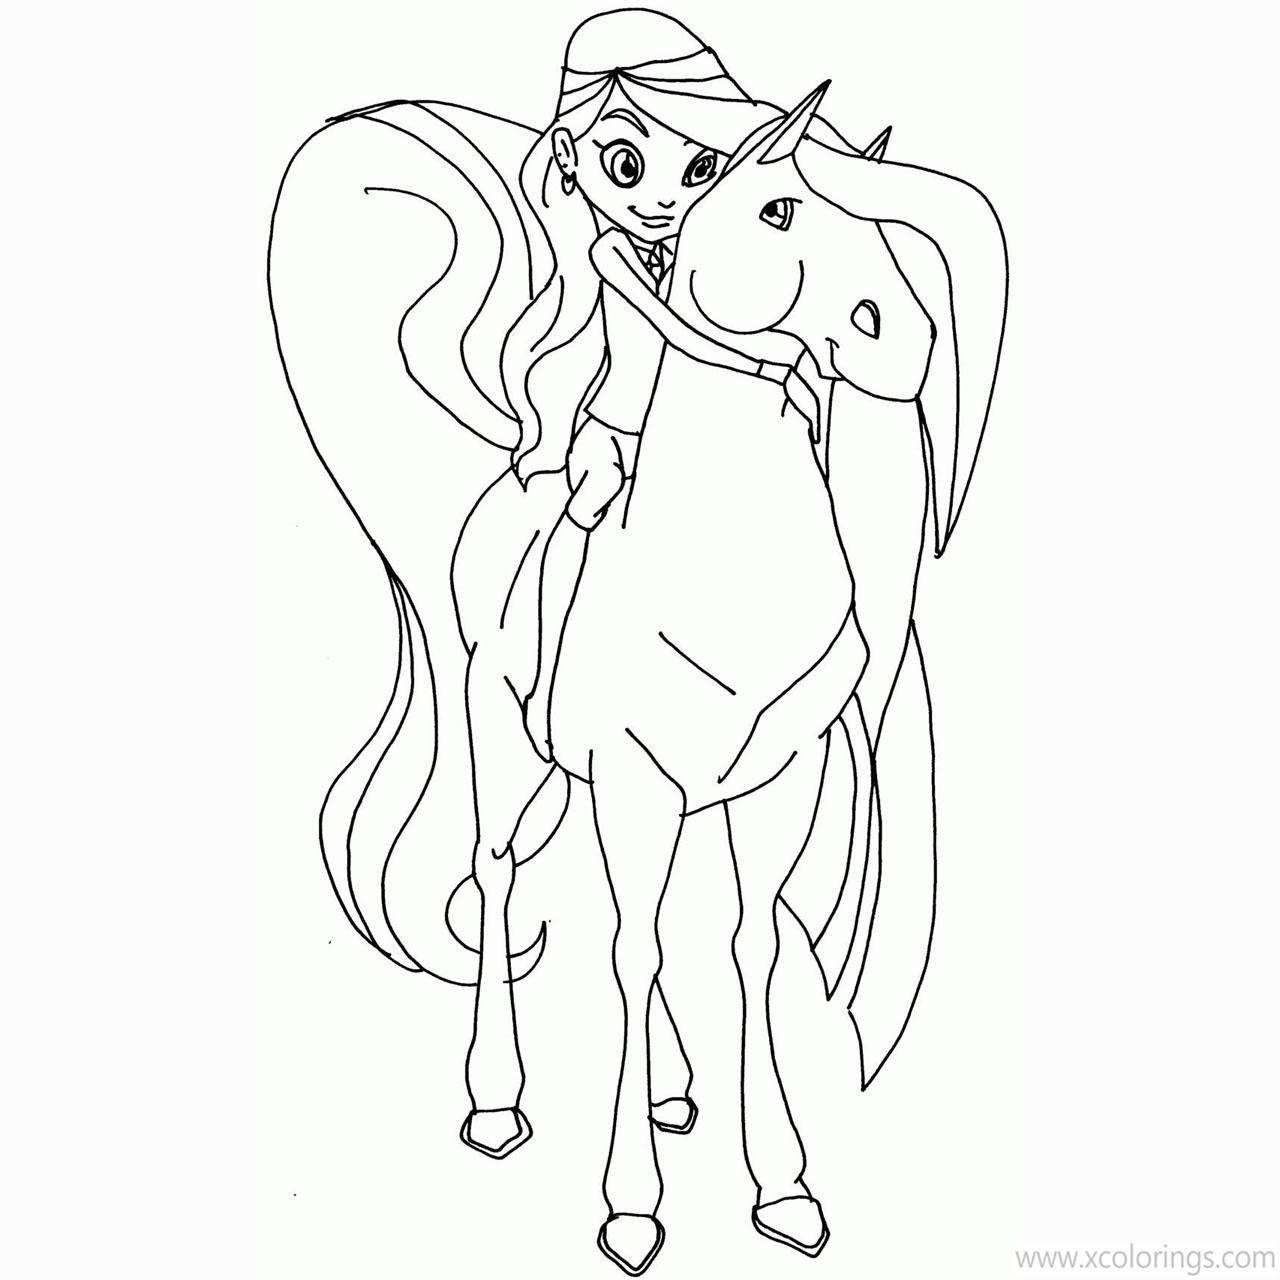 Free Horseland Coloring Pages and Sarah and Scarlet printable